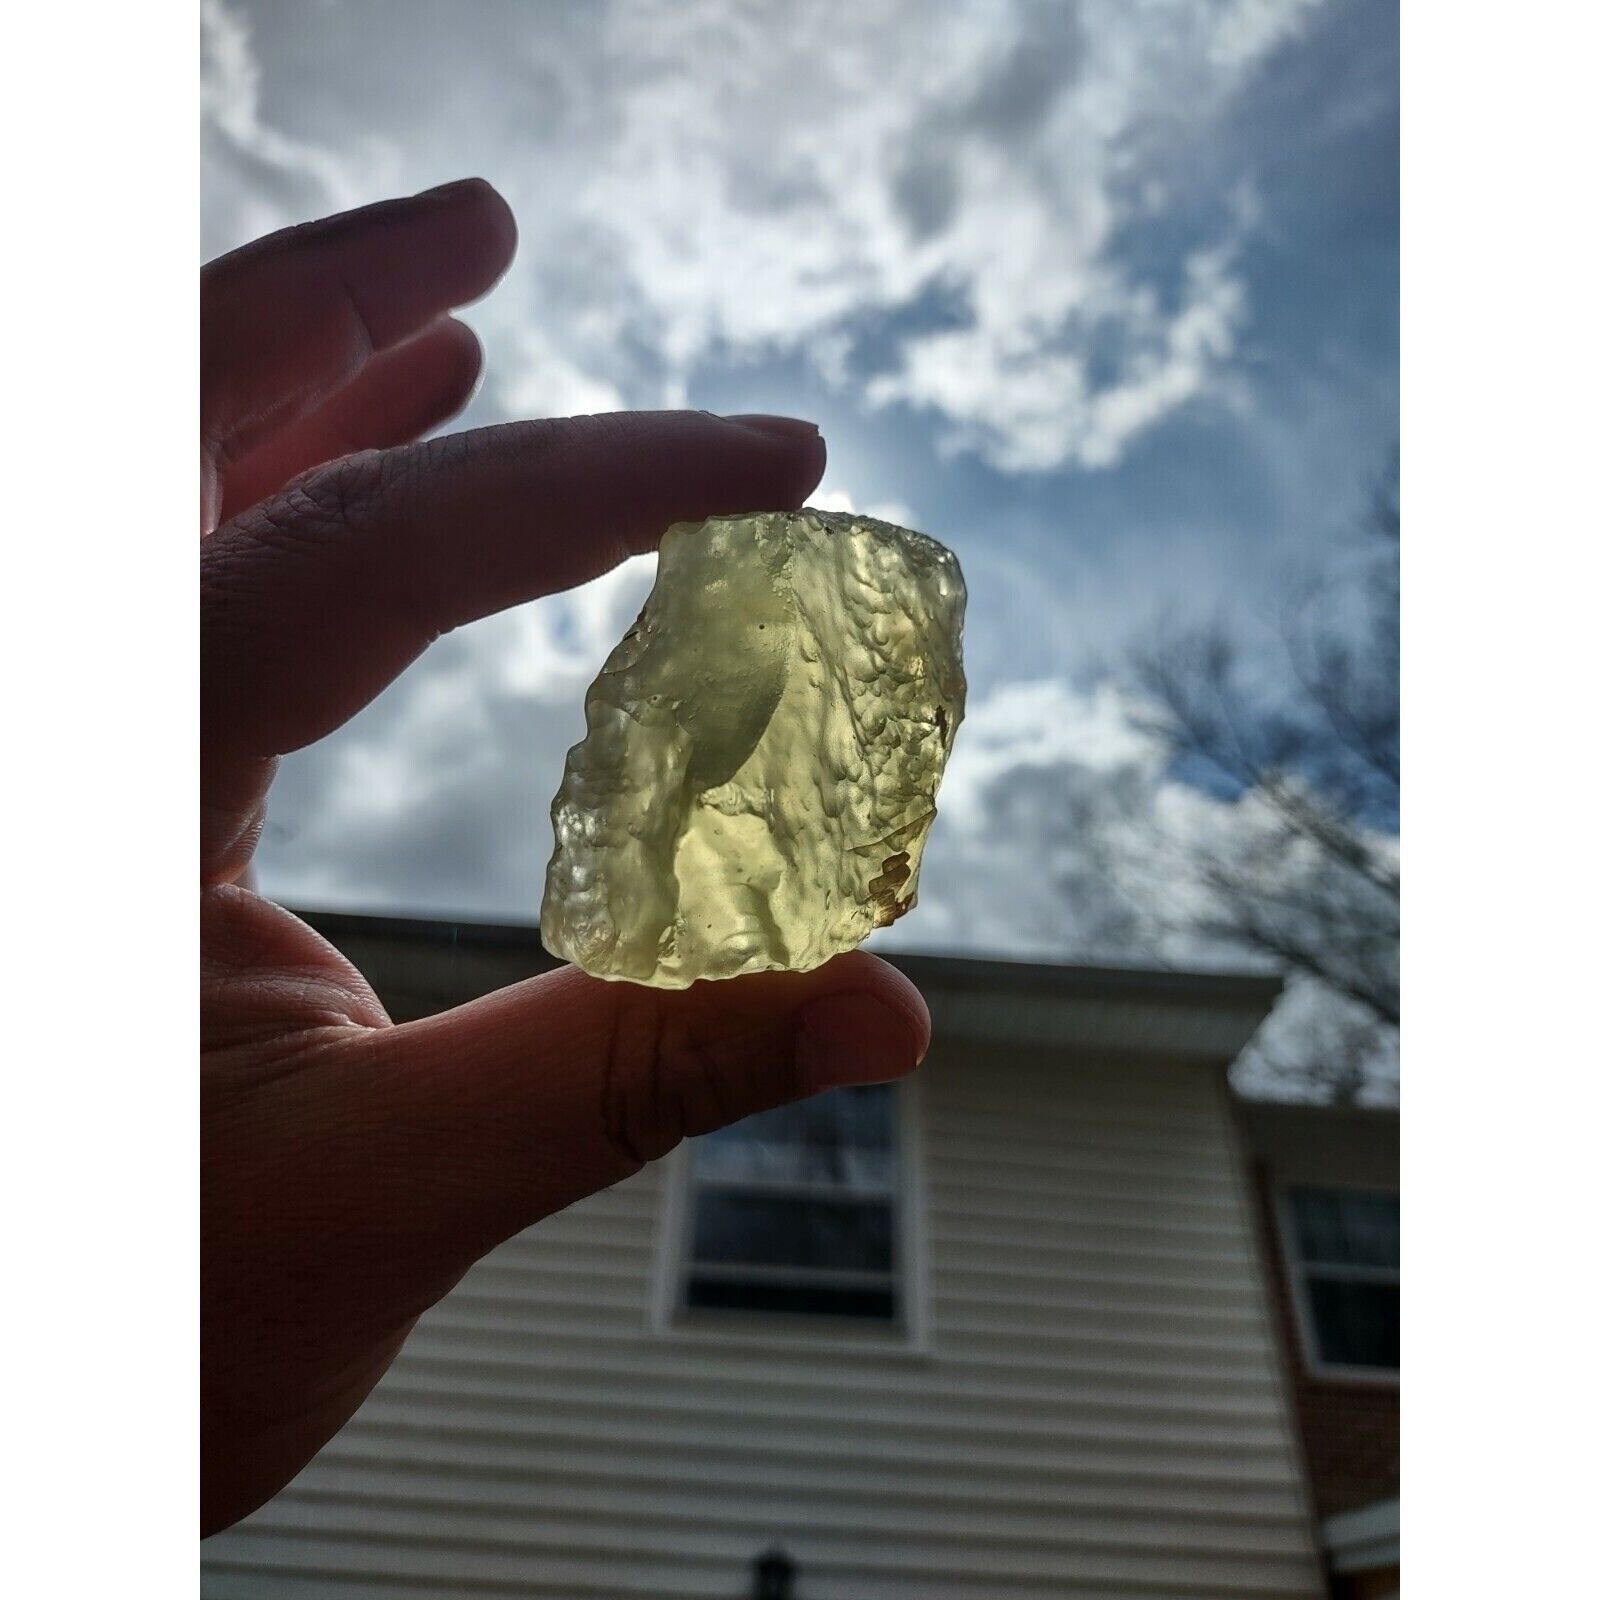 AAA+ museum quality The VERY BEST  NATURAL Libyan Desert Glass 600ct